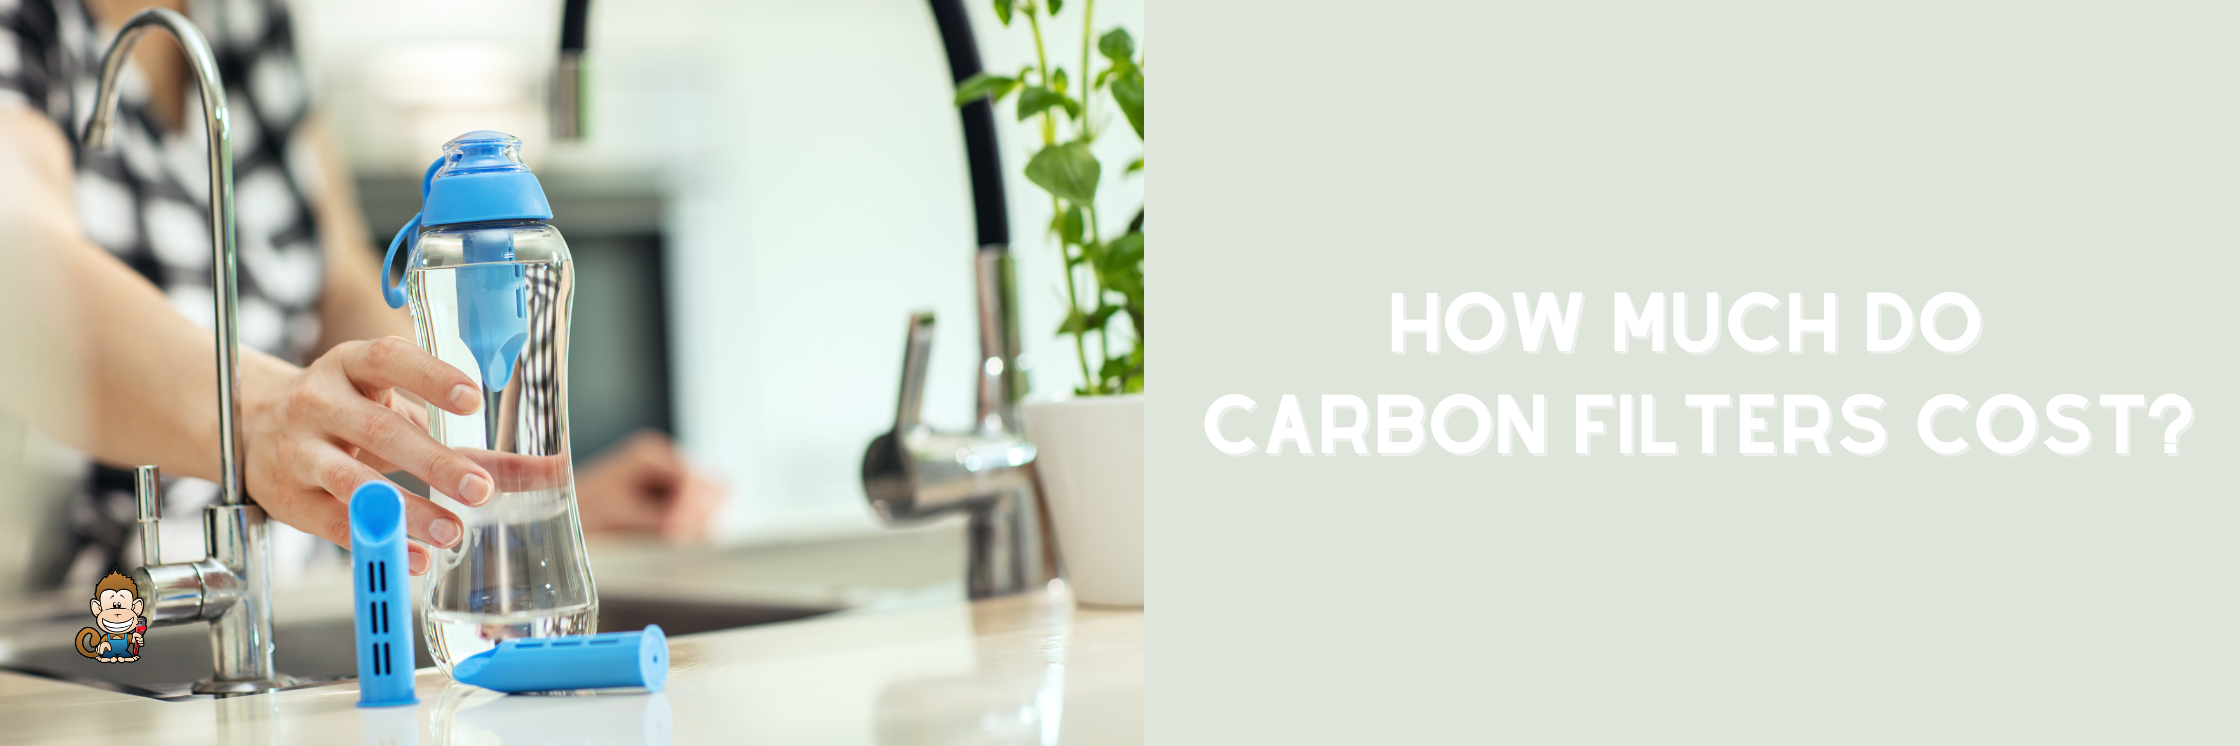 How Much Do Carbon Filters Cost?